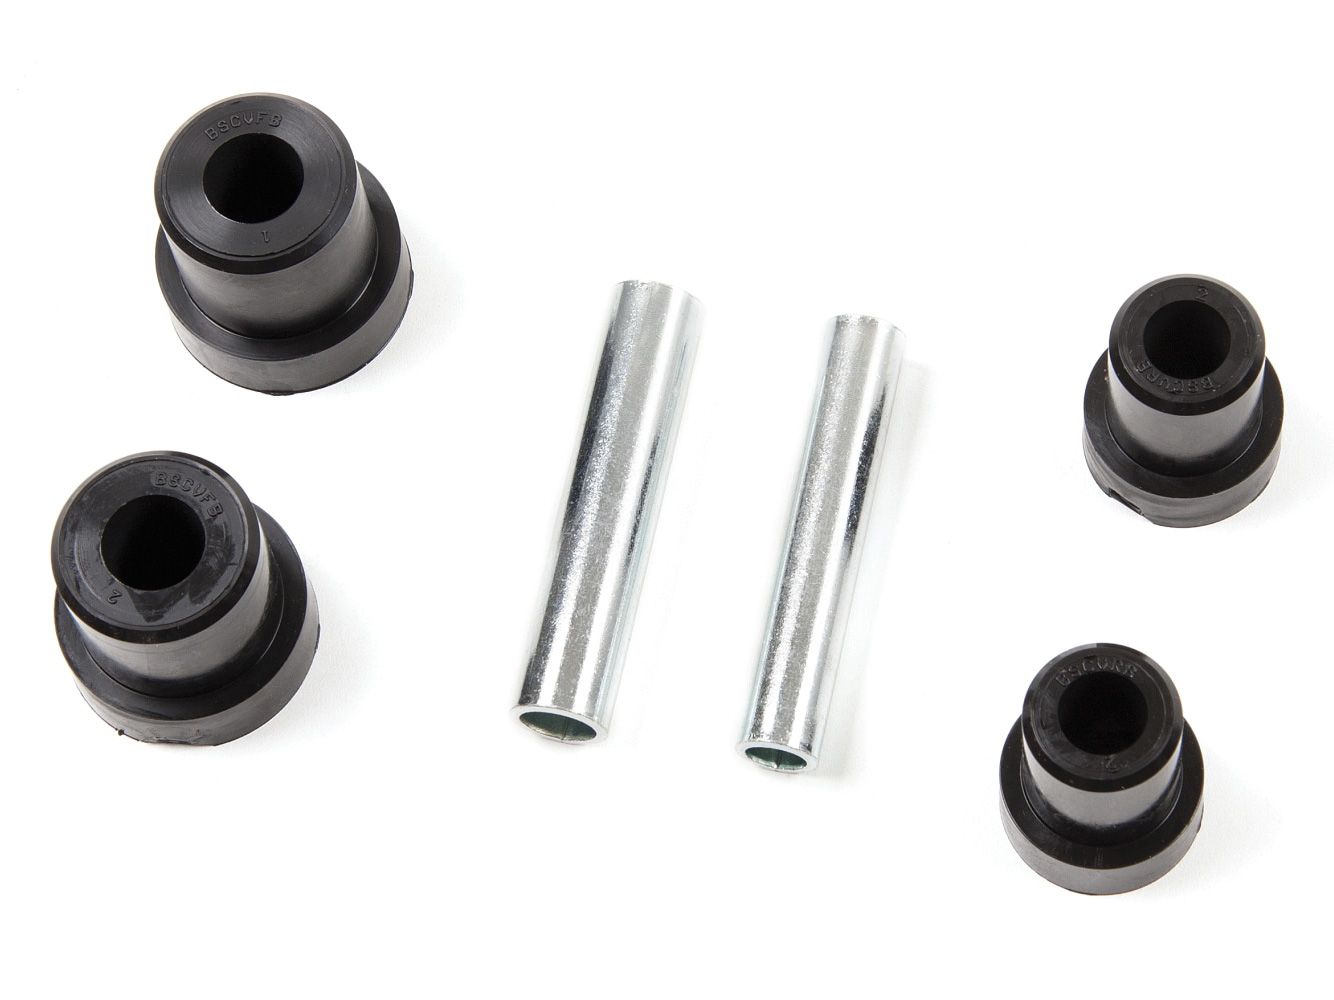 Pickup 1/2, 3/4 ton 1973-1987 Chevy 4WD Front Leaf Spring Bushing Kit by Zone Off-Road